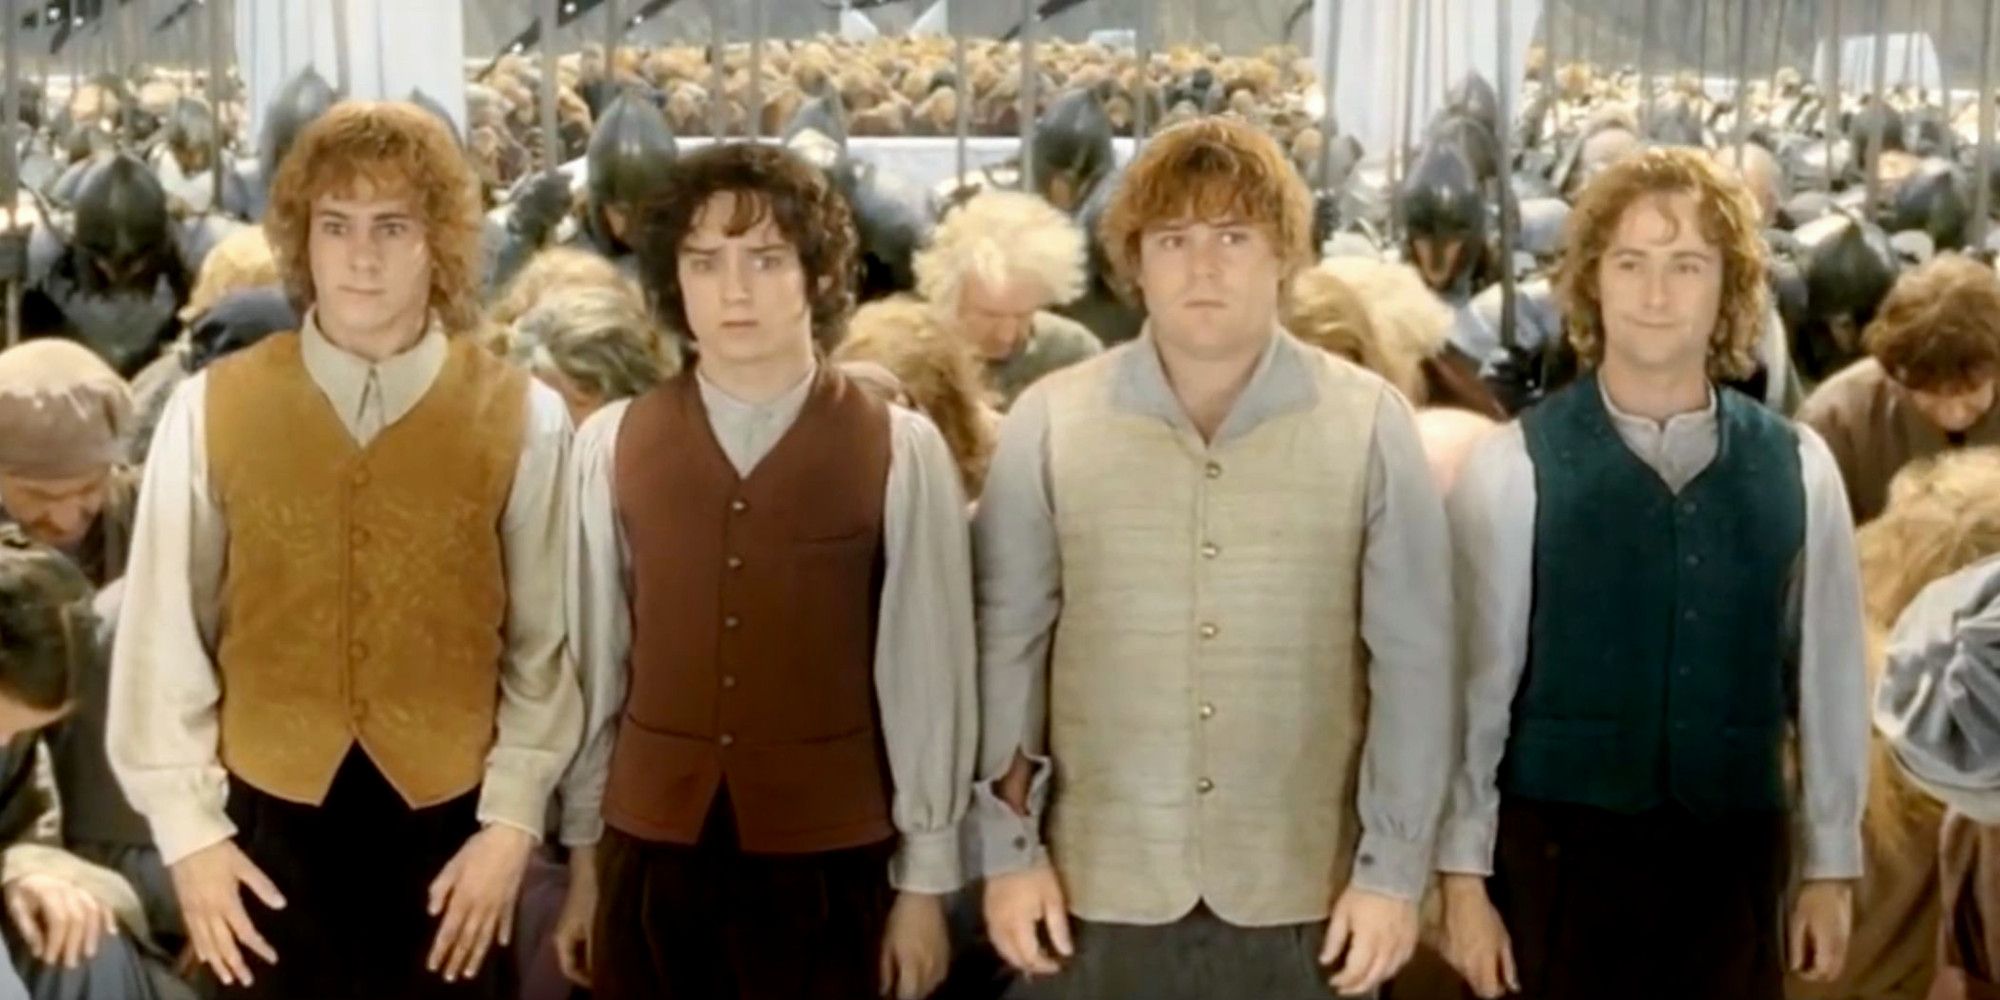 The Lord of the Rings studio wants to kill 3 hobbits